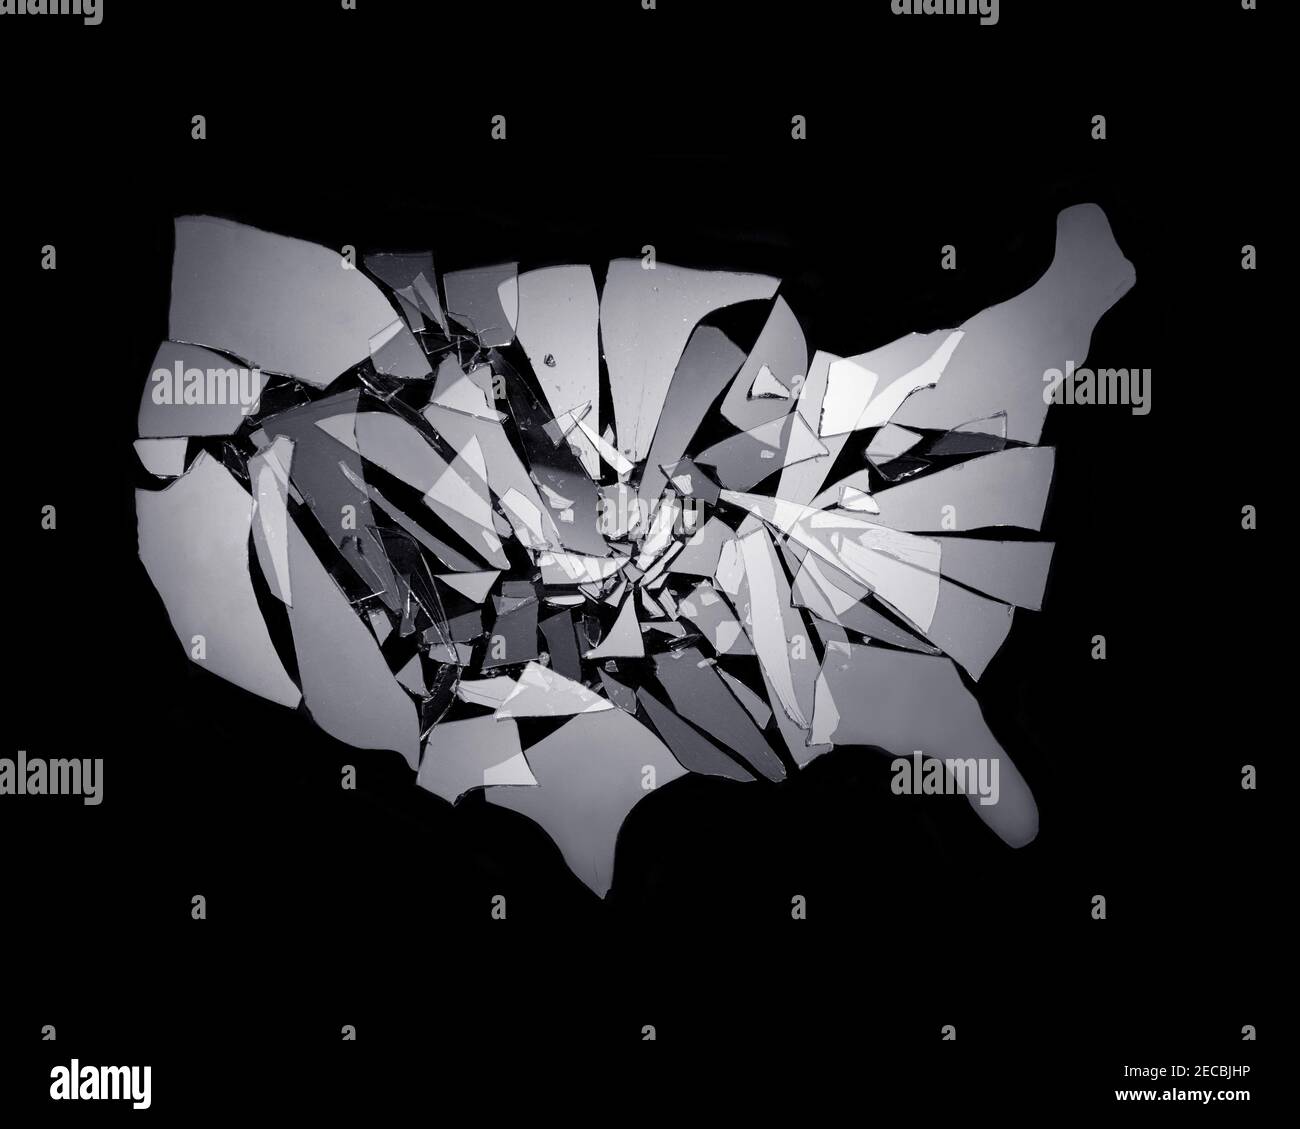 Broken glass in the shape of the united states on a black background Stock Photo